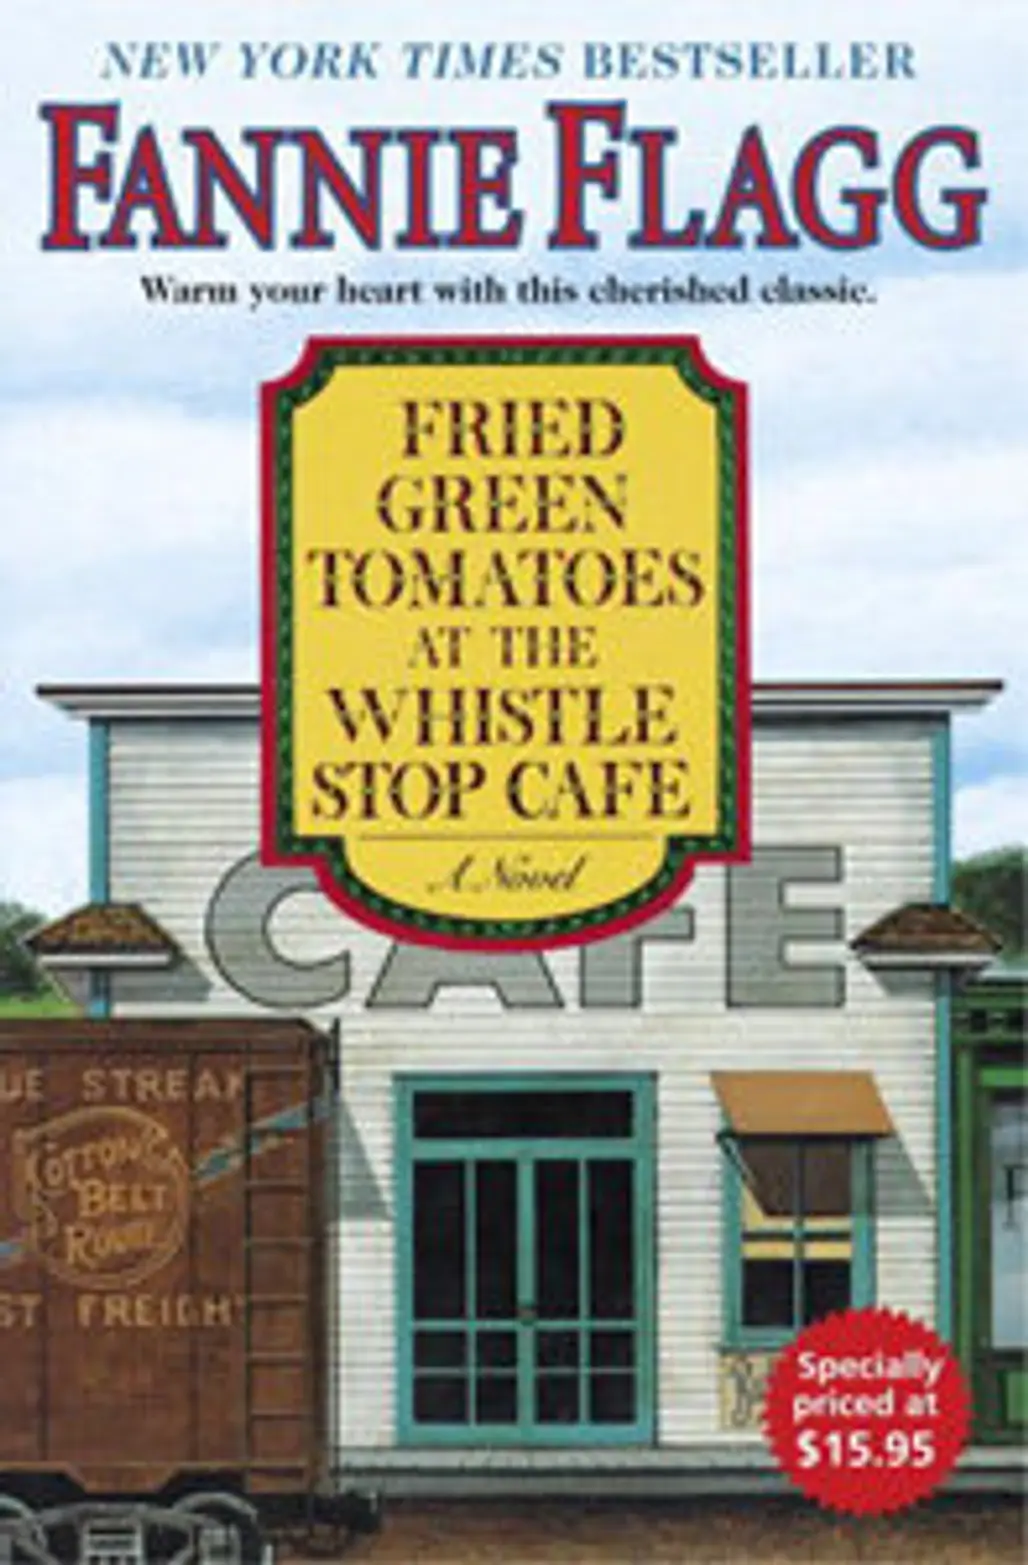 Fried Green Tomatoes at the Whistlestop Café by Fannie Flagg